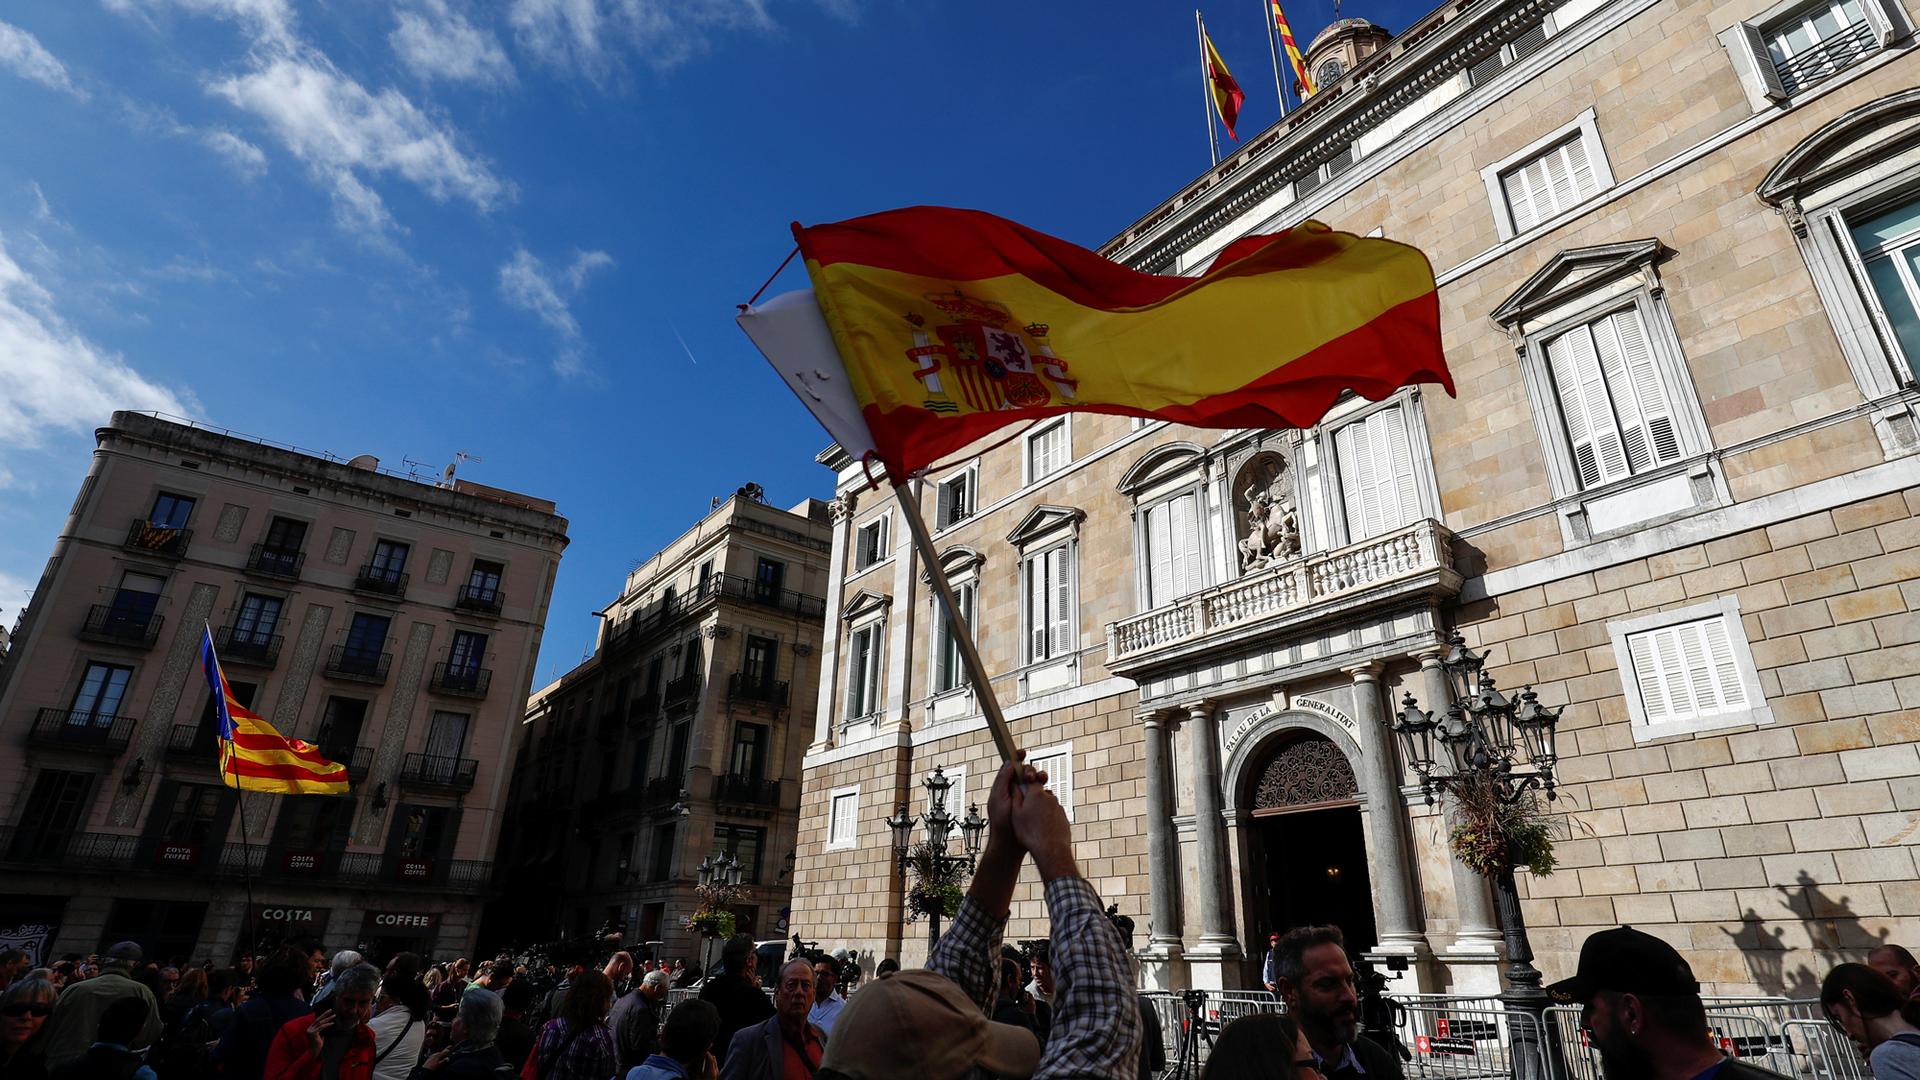 Spanish and Catalan flags are waved in front of the Generalitat Palace, the Catalan regional government headquarters in Barcelona, Oct. 30, 2017.